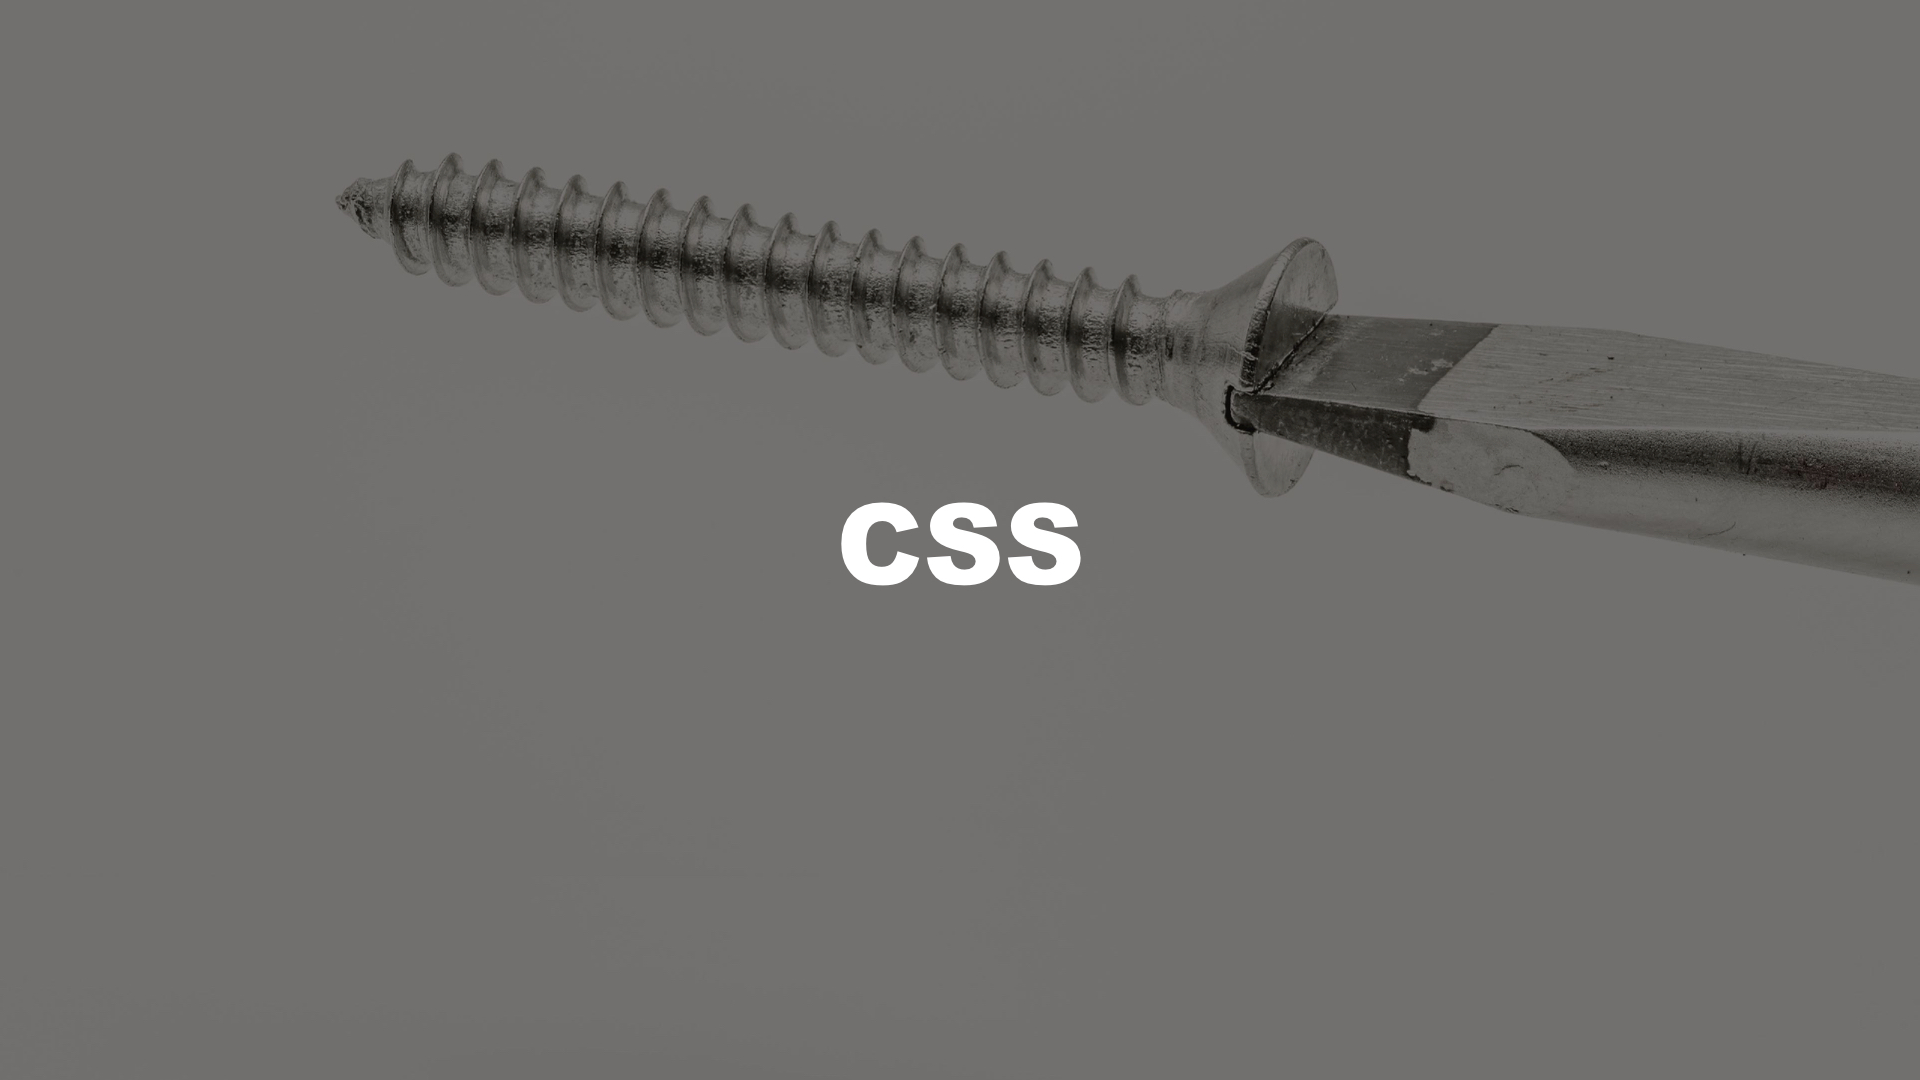 3 ways CSSinJS eliminates waste from our web development workflow